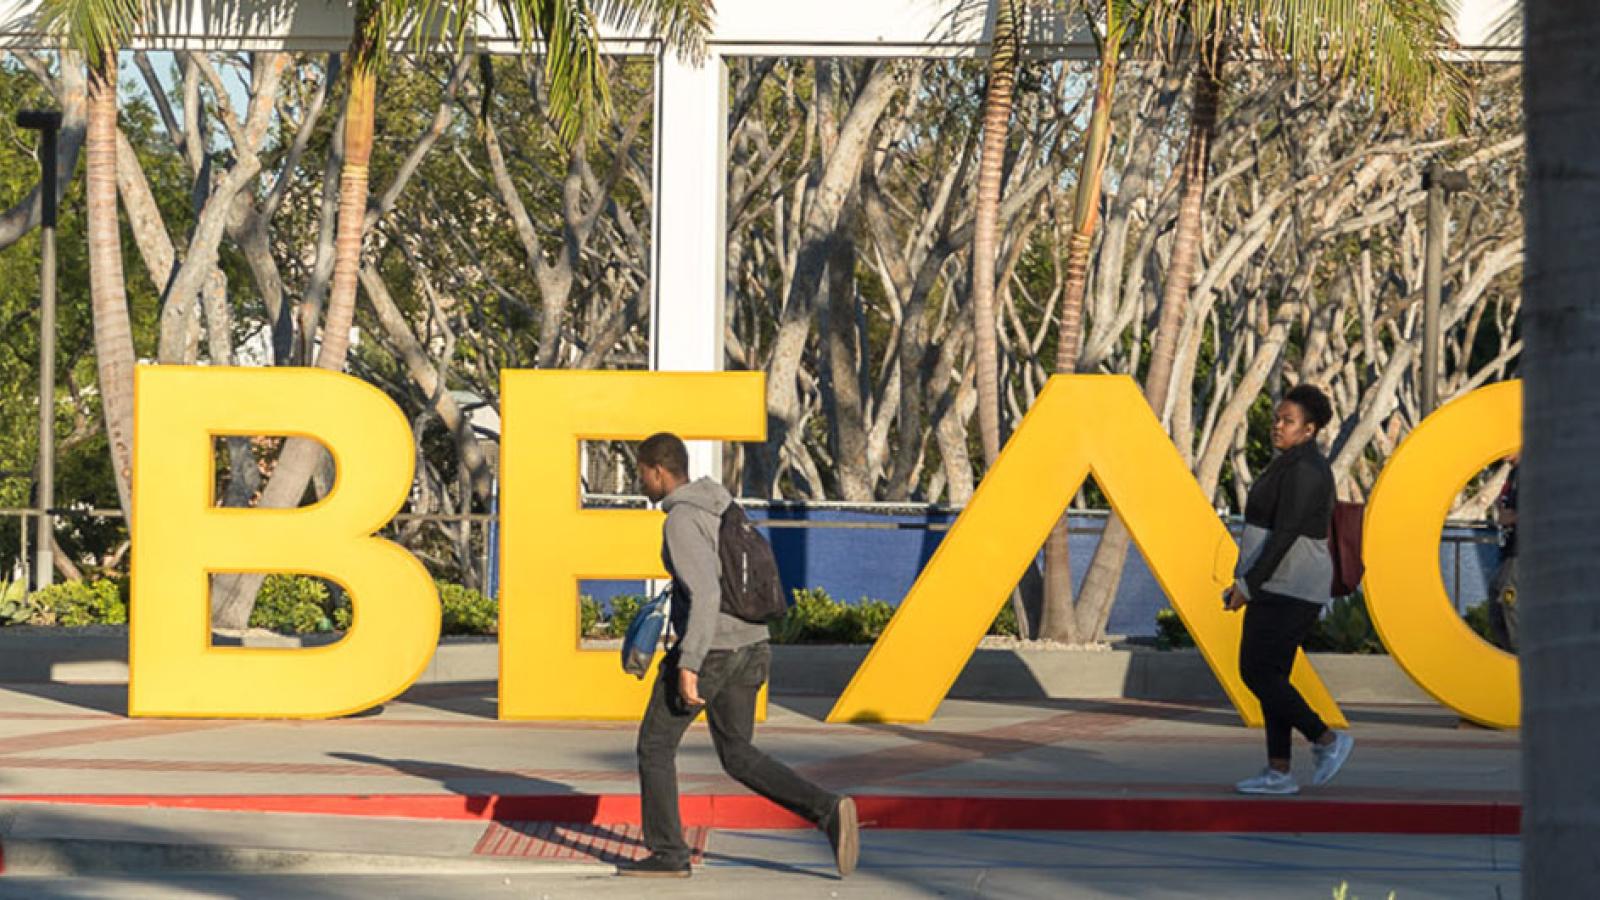 Students walk by the GO BEACH sign